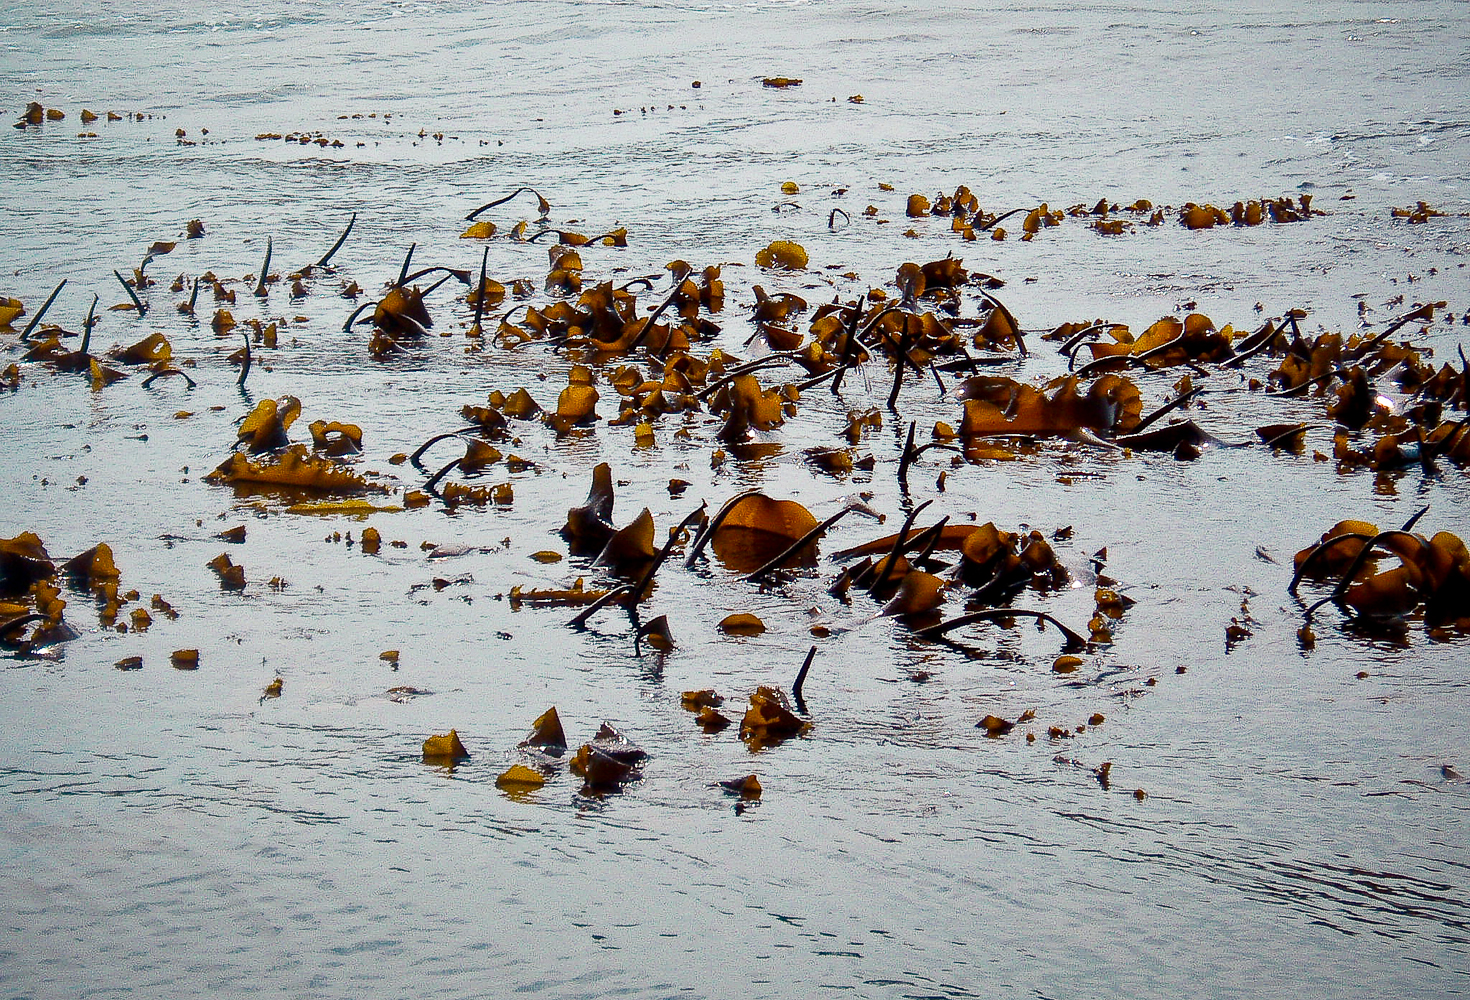 Kelp Bed, Very Low Tide, Midway Through the Harvest Process